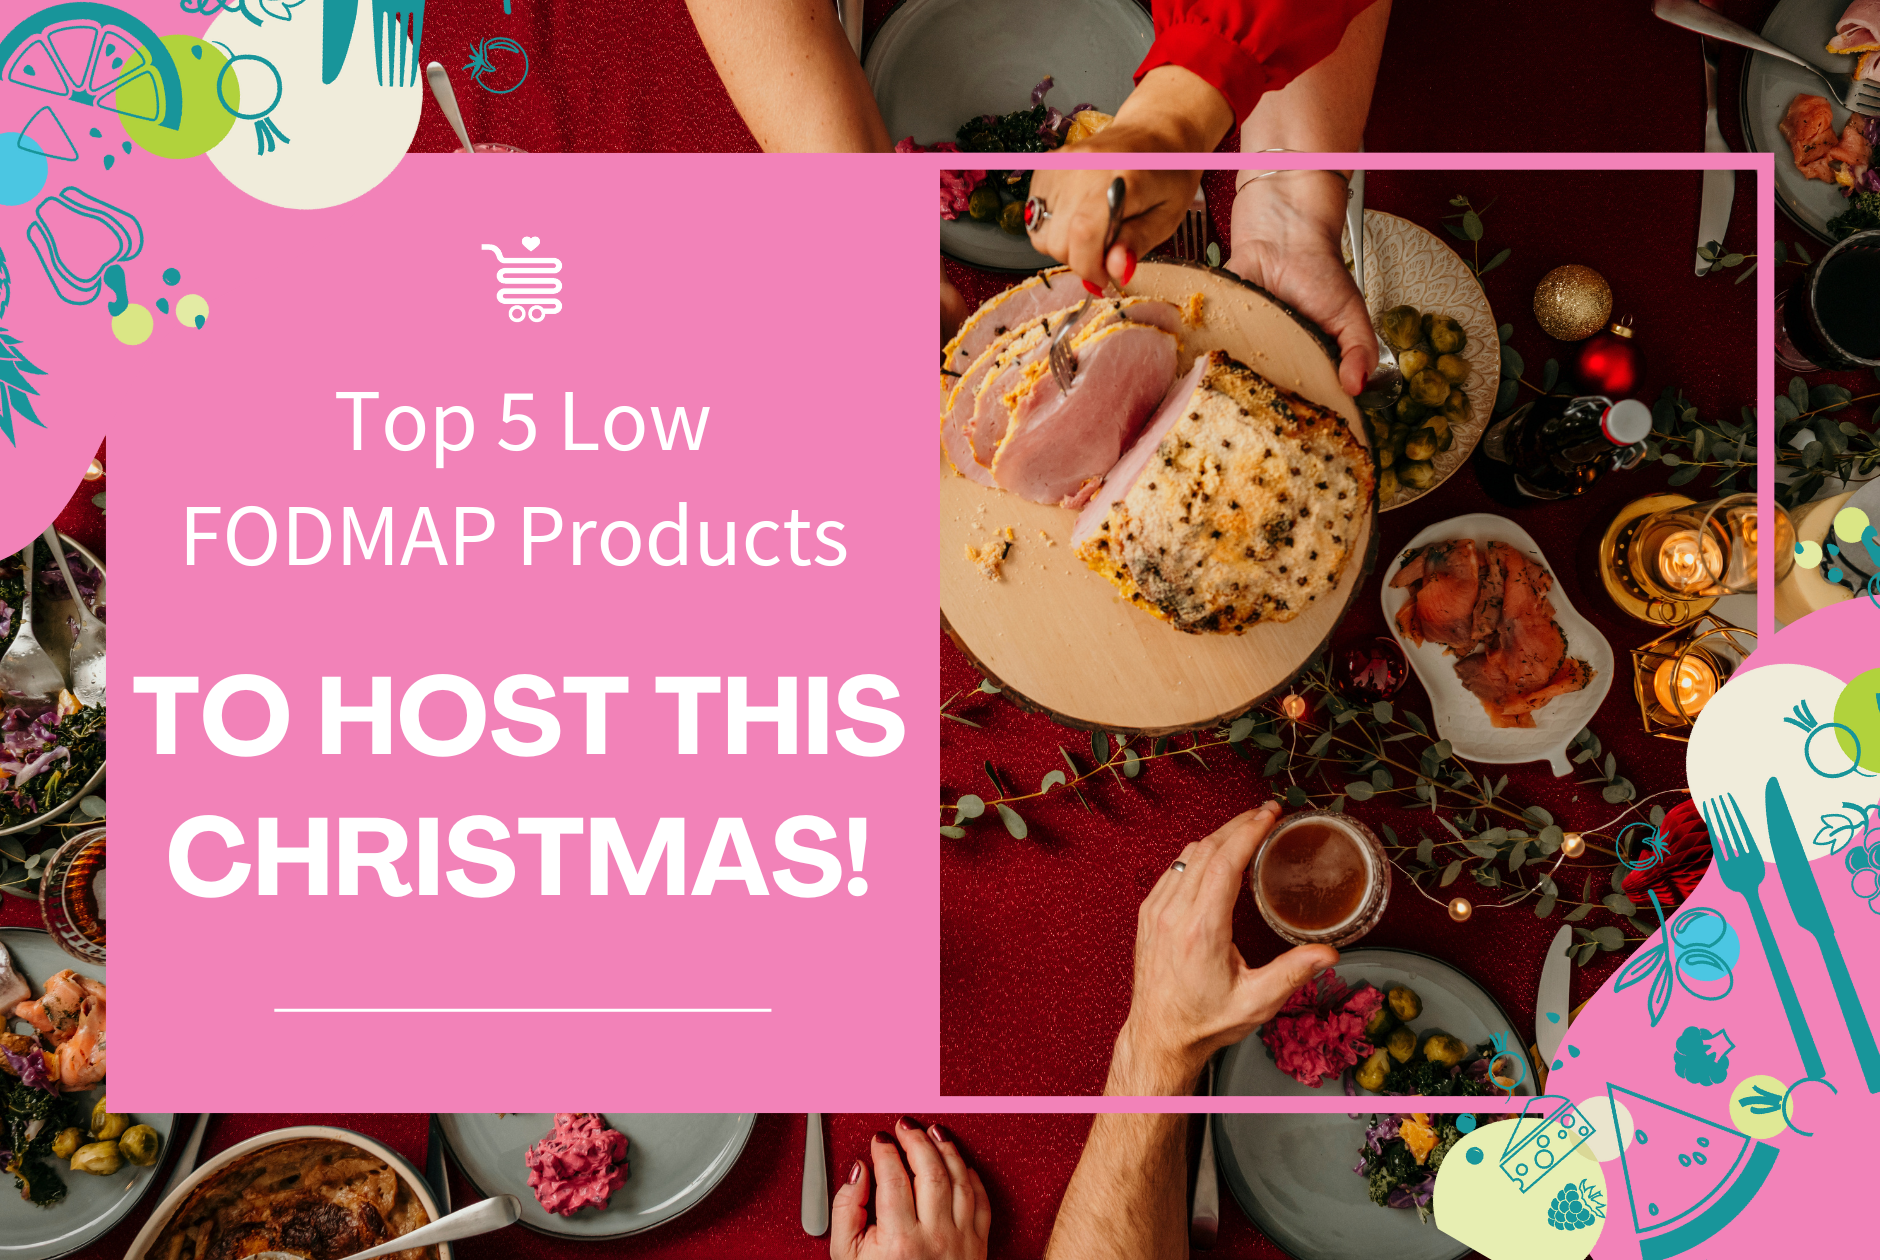 Top 5 Low FODMAP Products to Host this Christmas!